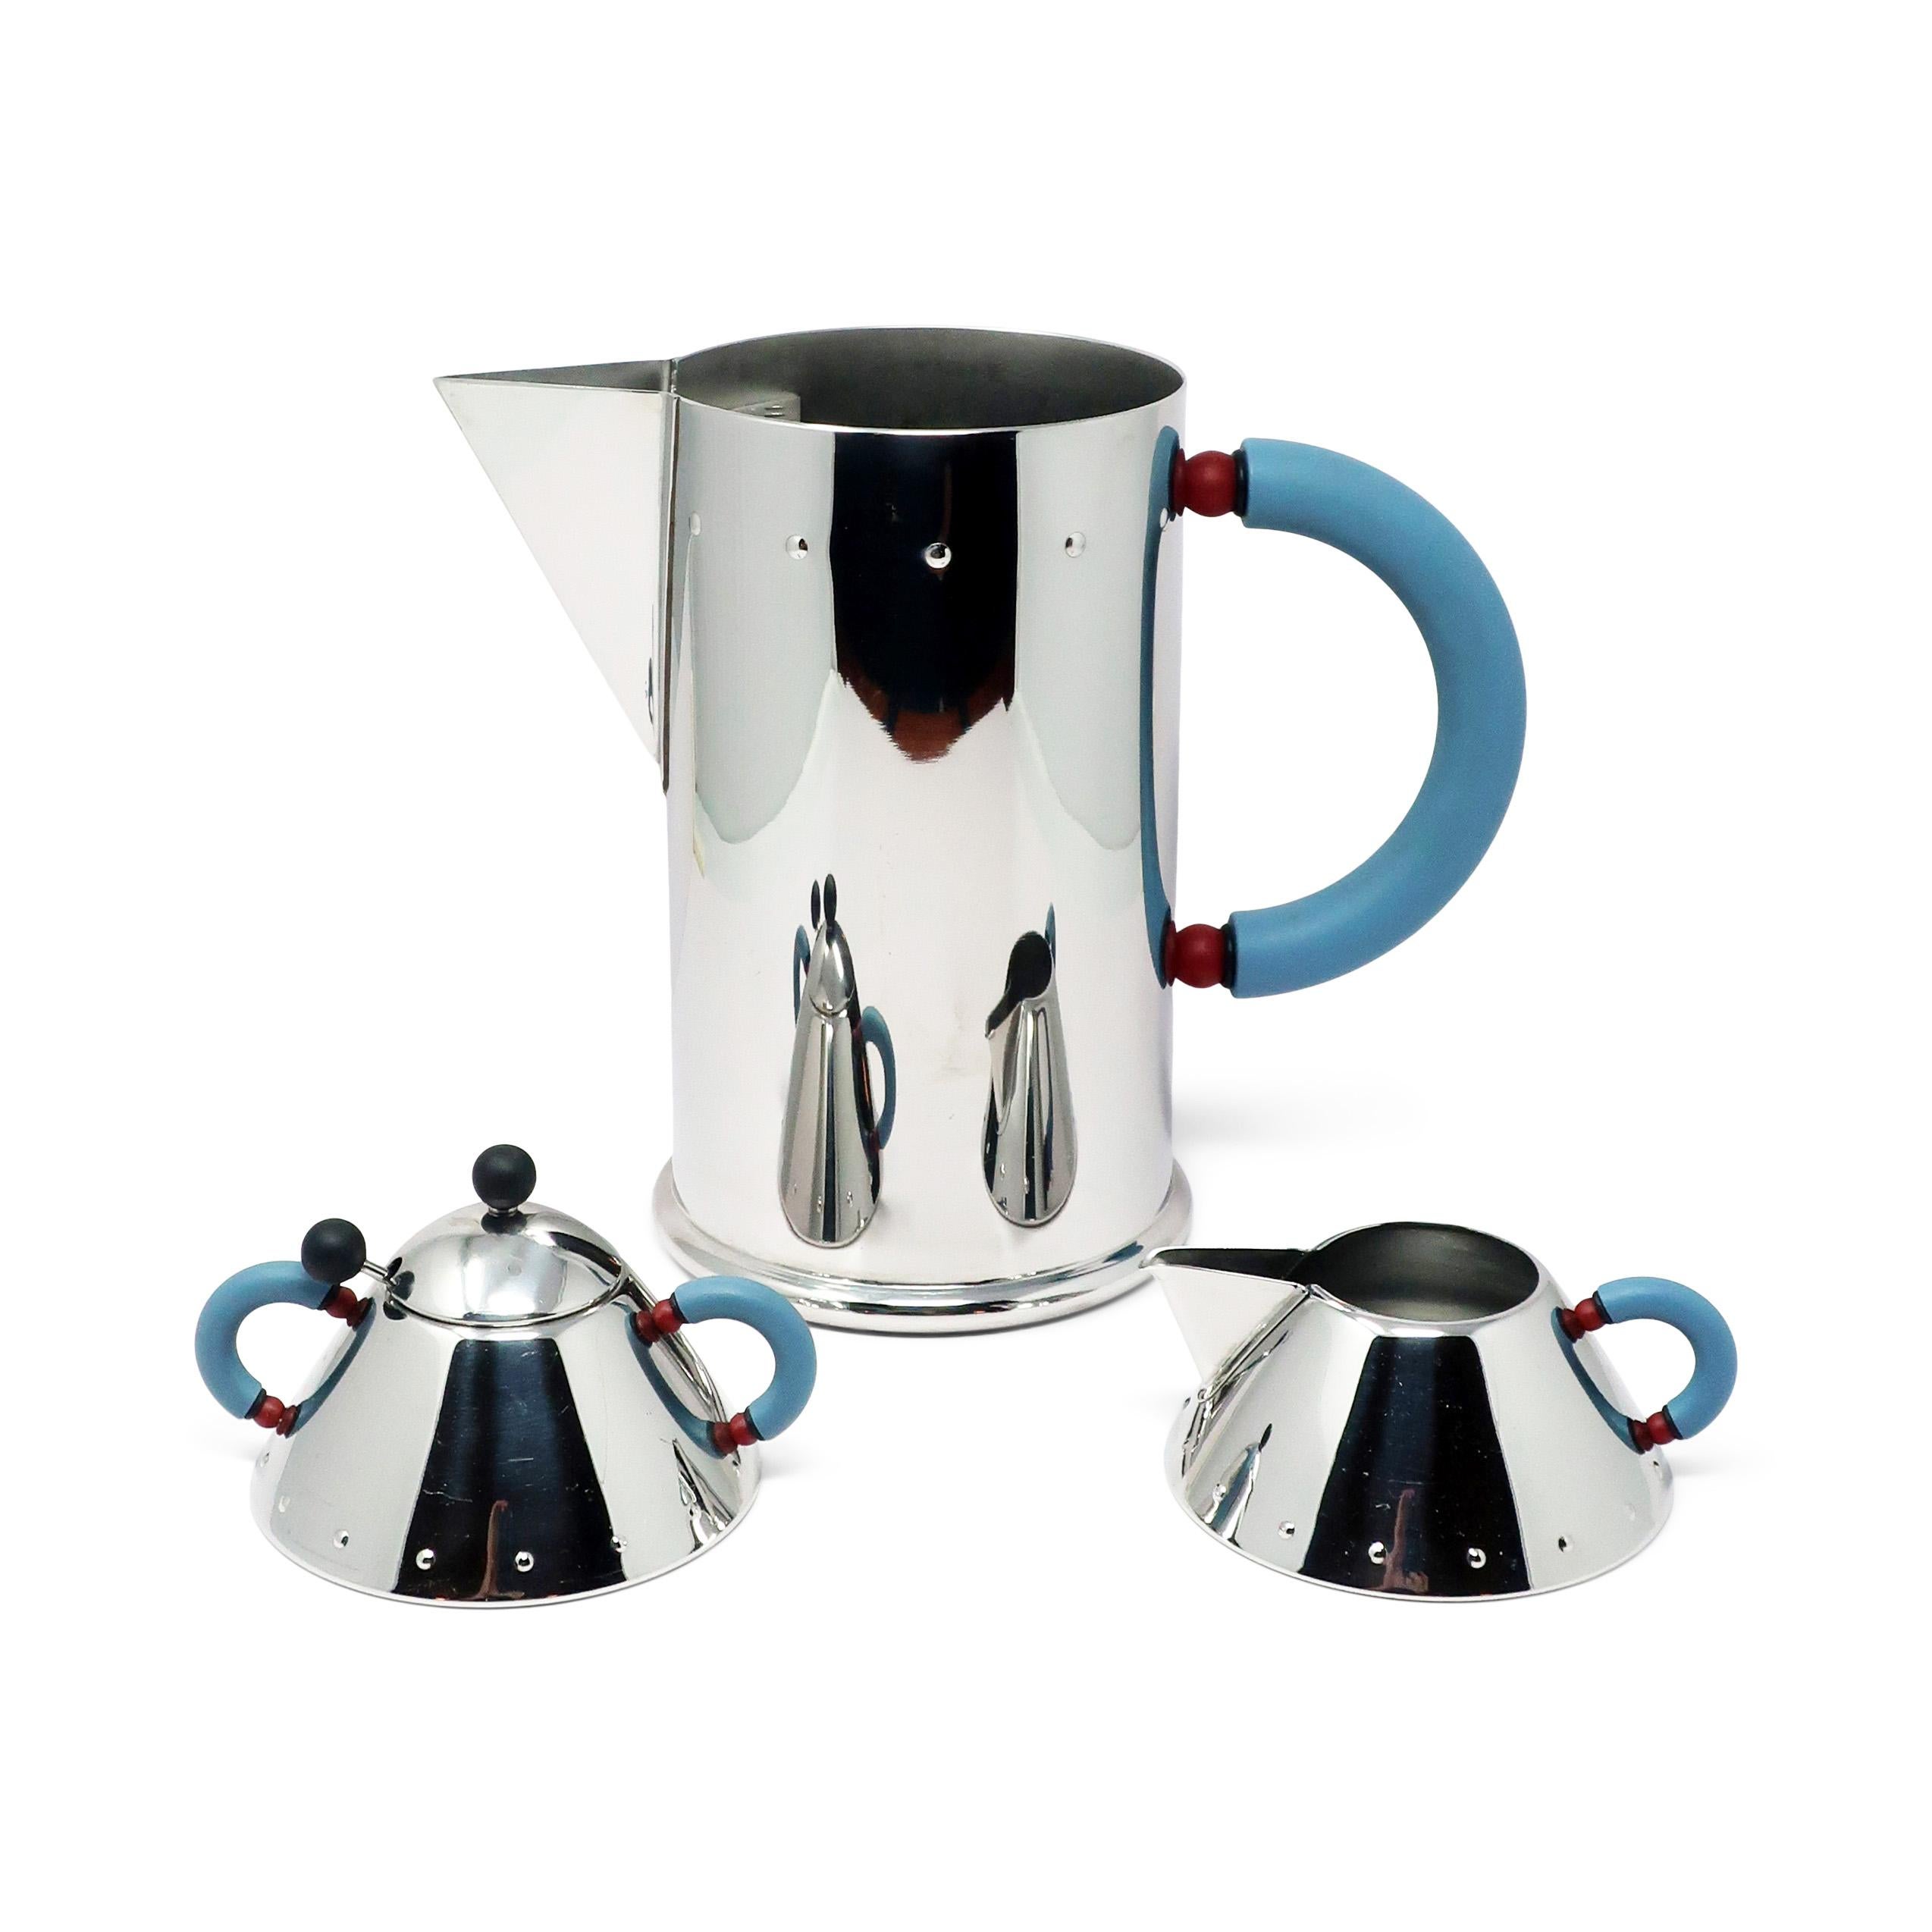 A stainless steel sugar bowl and creamer set, along with a water pitcher, designed by Memphis Group pioneer Michael Graves for Alessi of Italy. Sugar bowl and creamer in polished 18/10 stainless steel with blue-grey plastic handles and tiny maroon